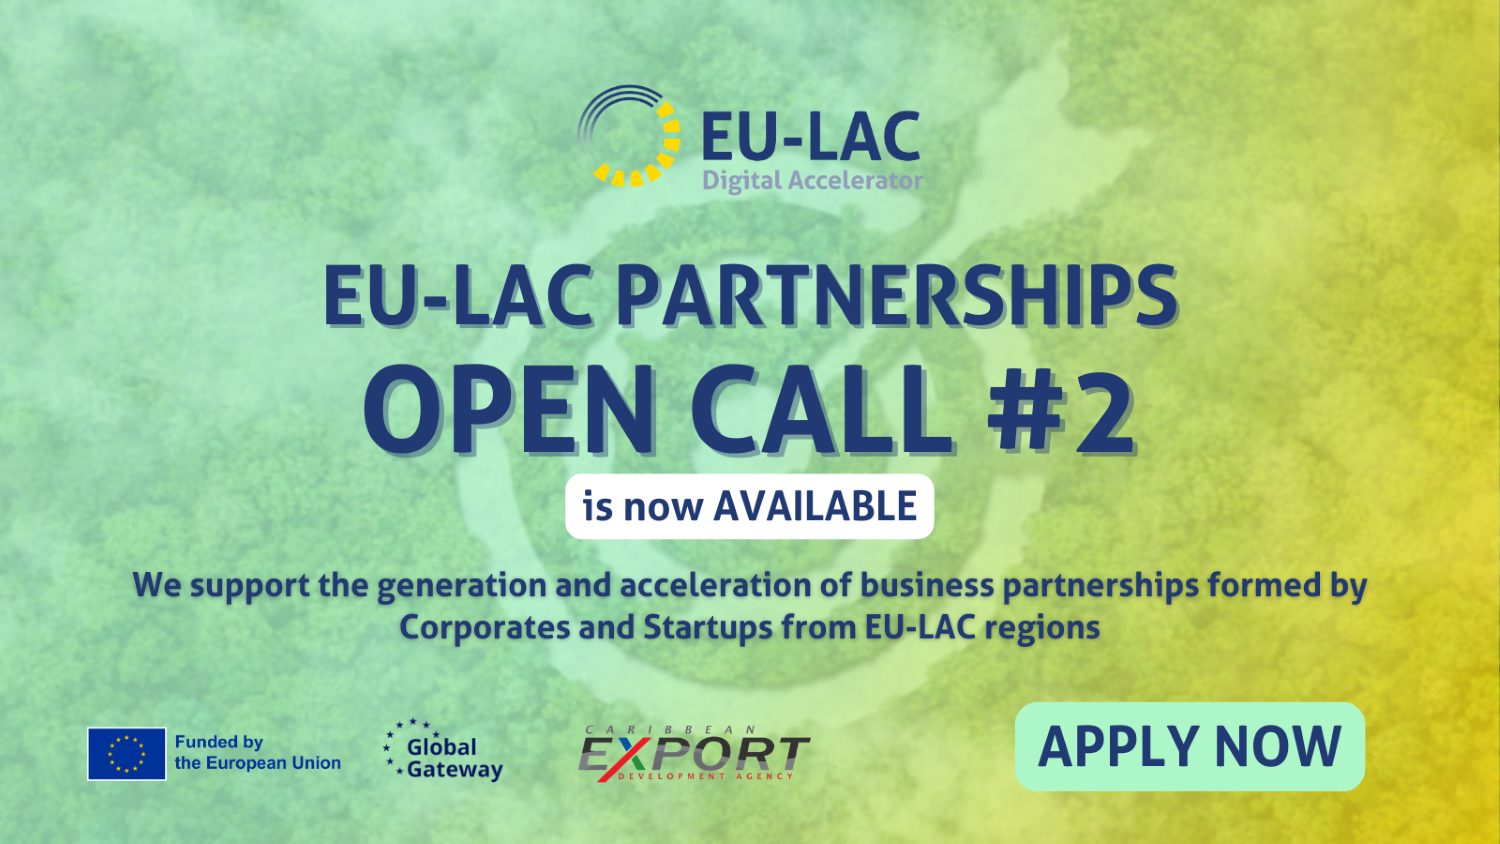 EU-LAC Digital Accelerator launches the second Open Call for European, Latin American and Caribbean Digital Business Partnerships